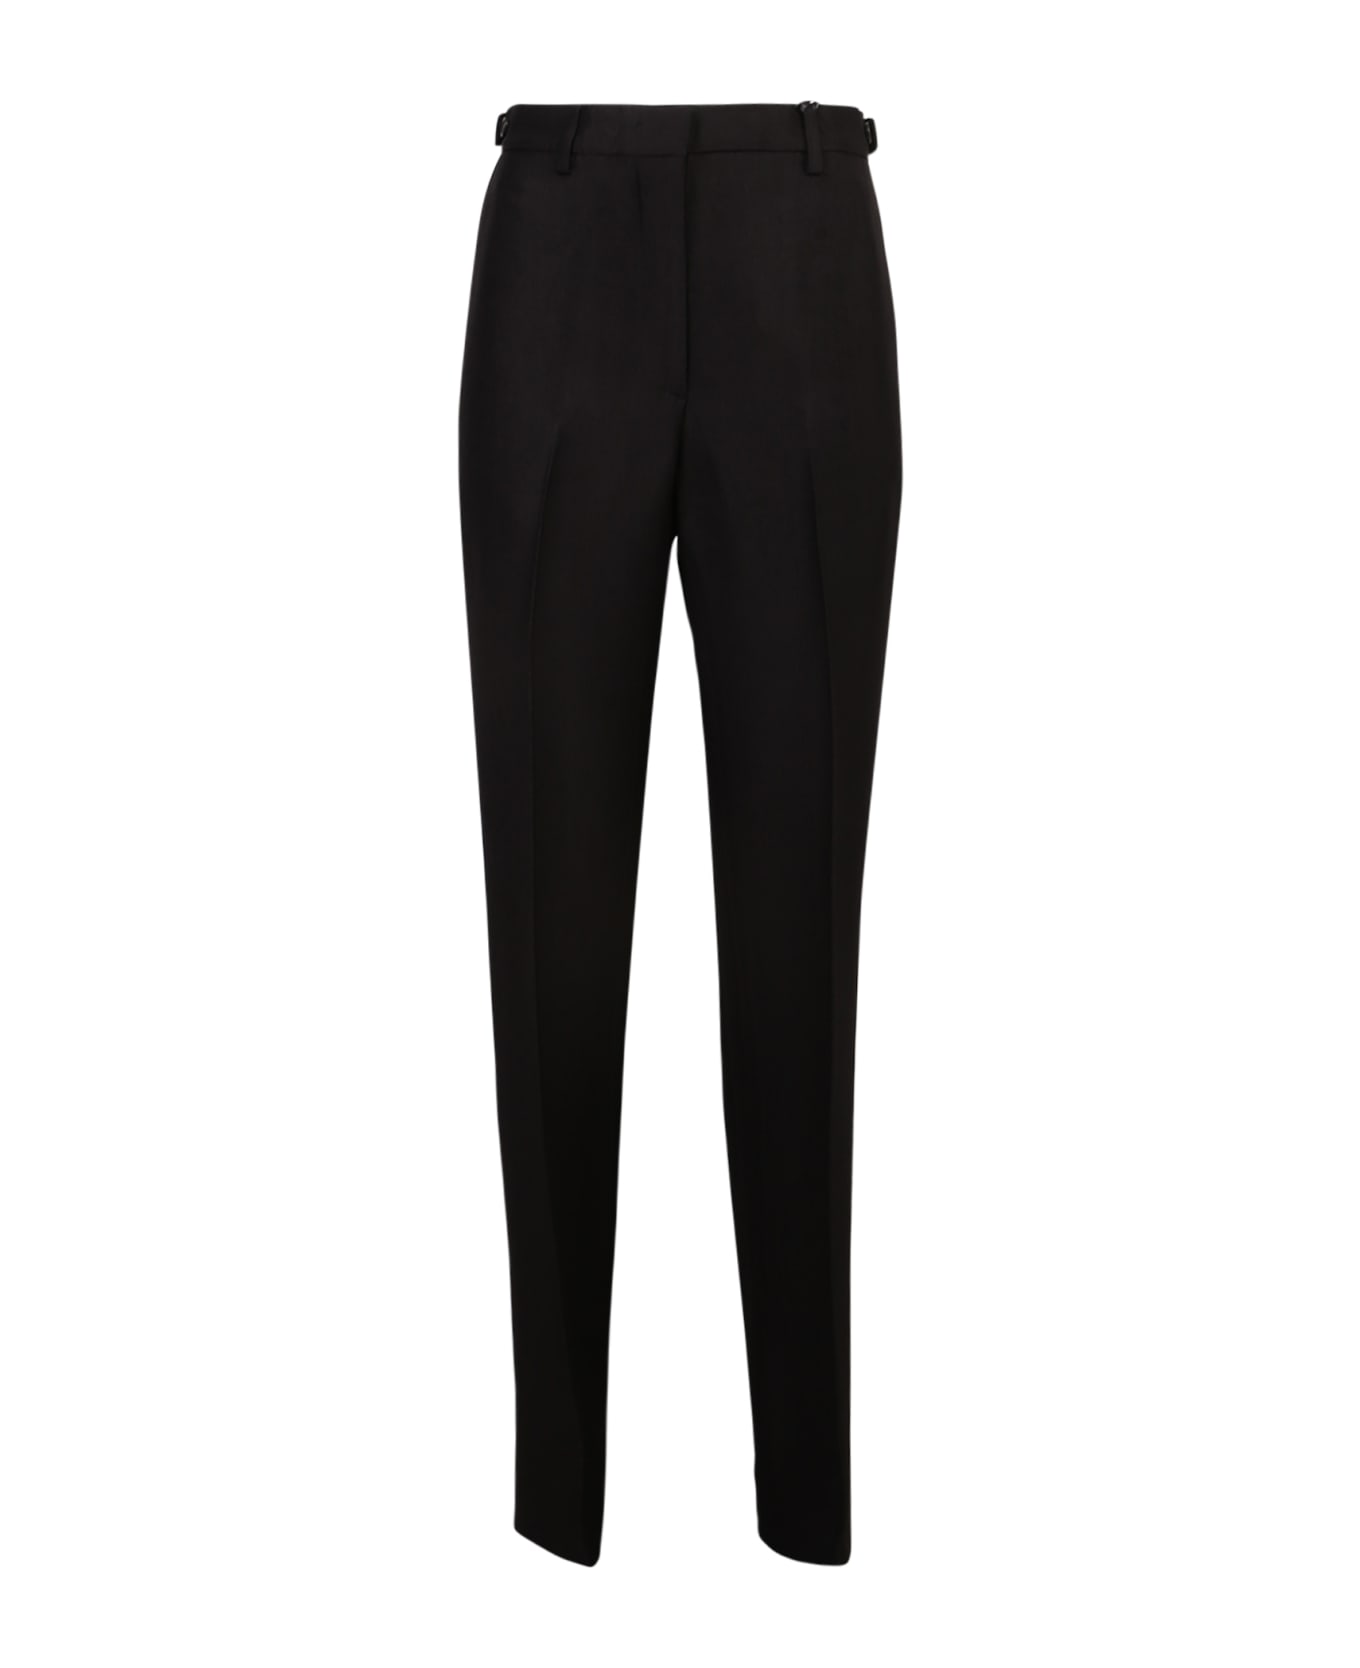 MSGM Tailored High-waisted Trousers - Black ボトムス